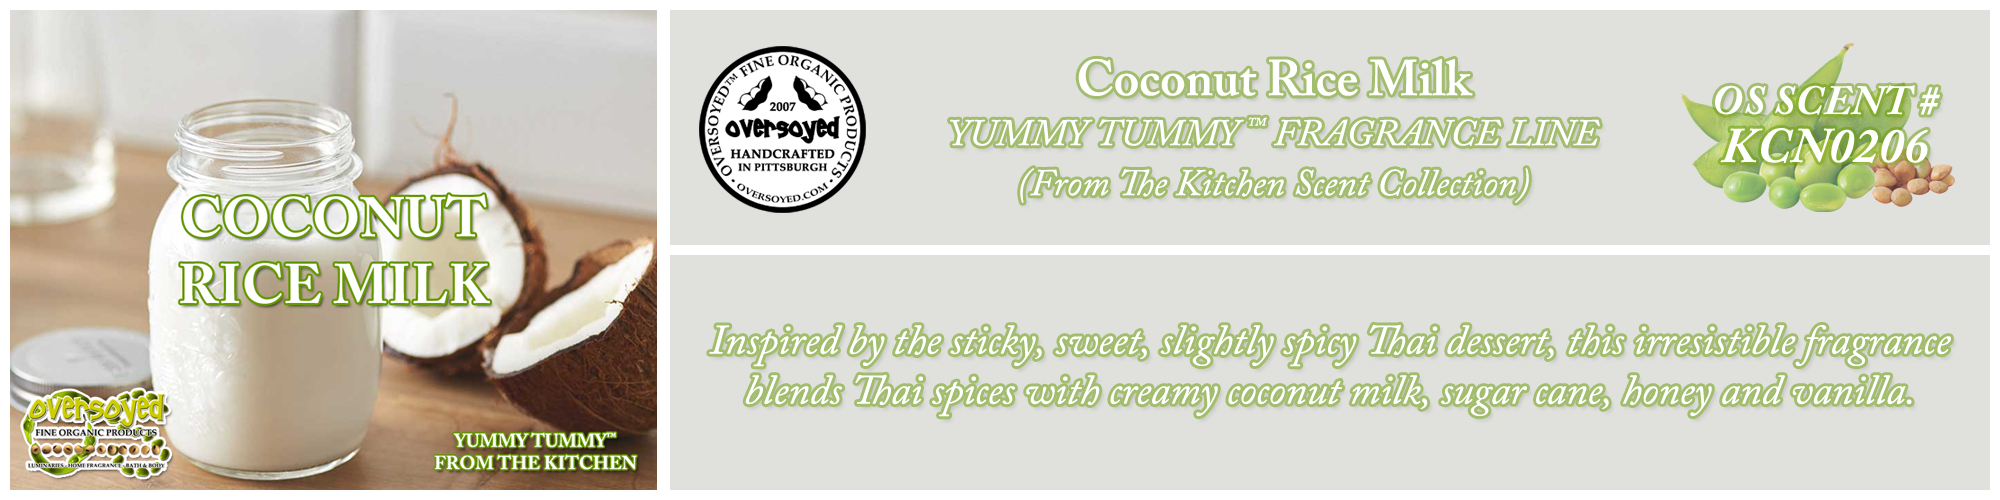 Coconut Rice Milk Handcrafted Products Collection